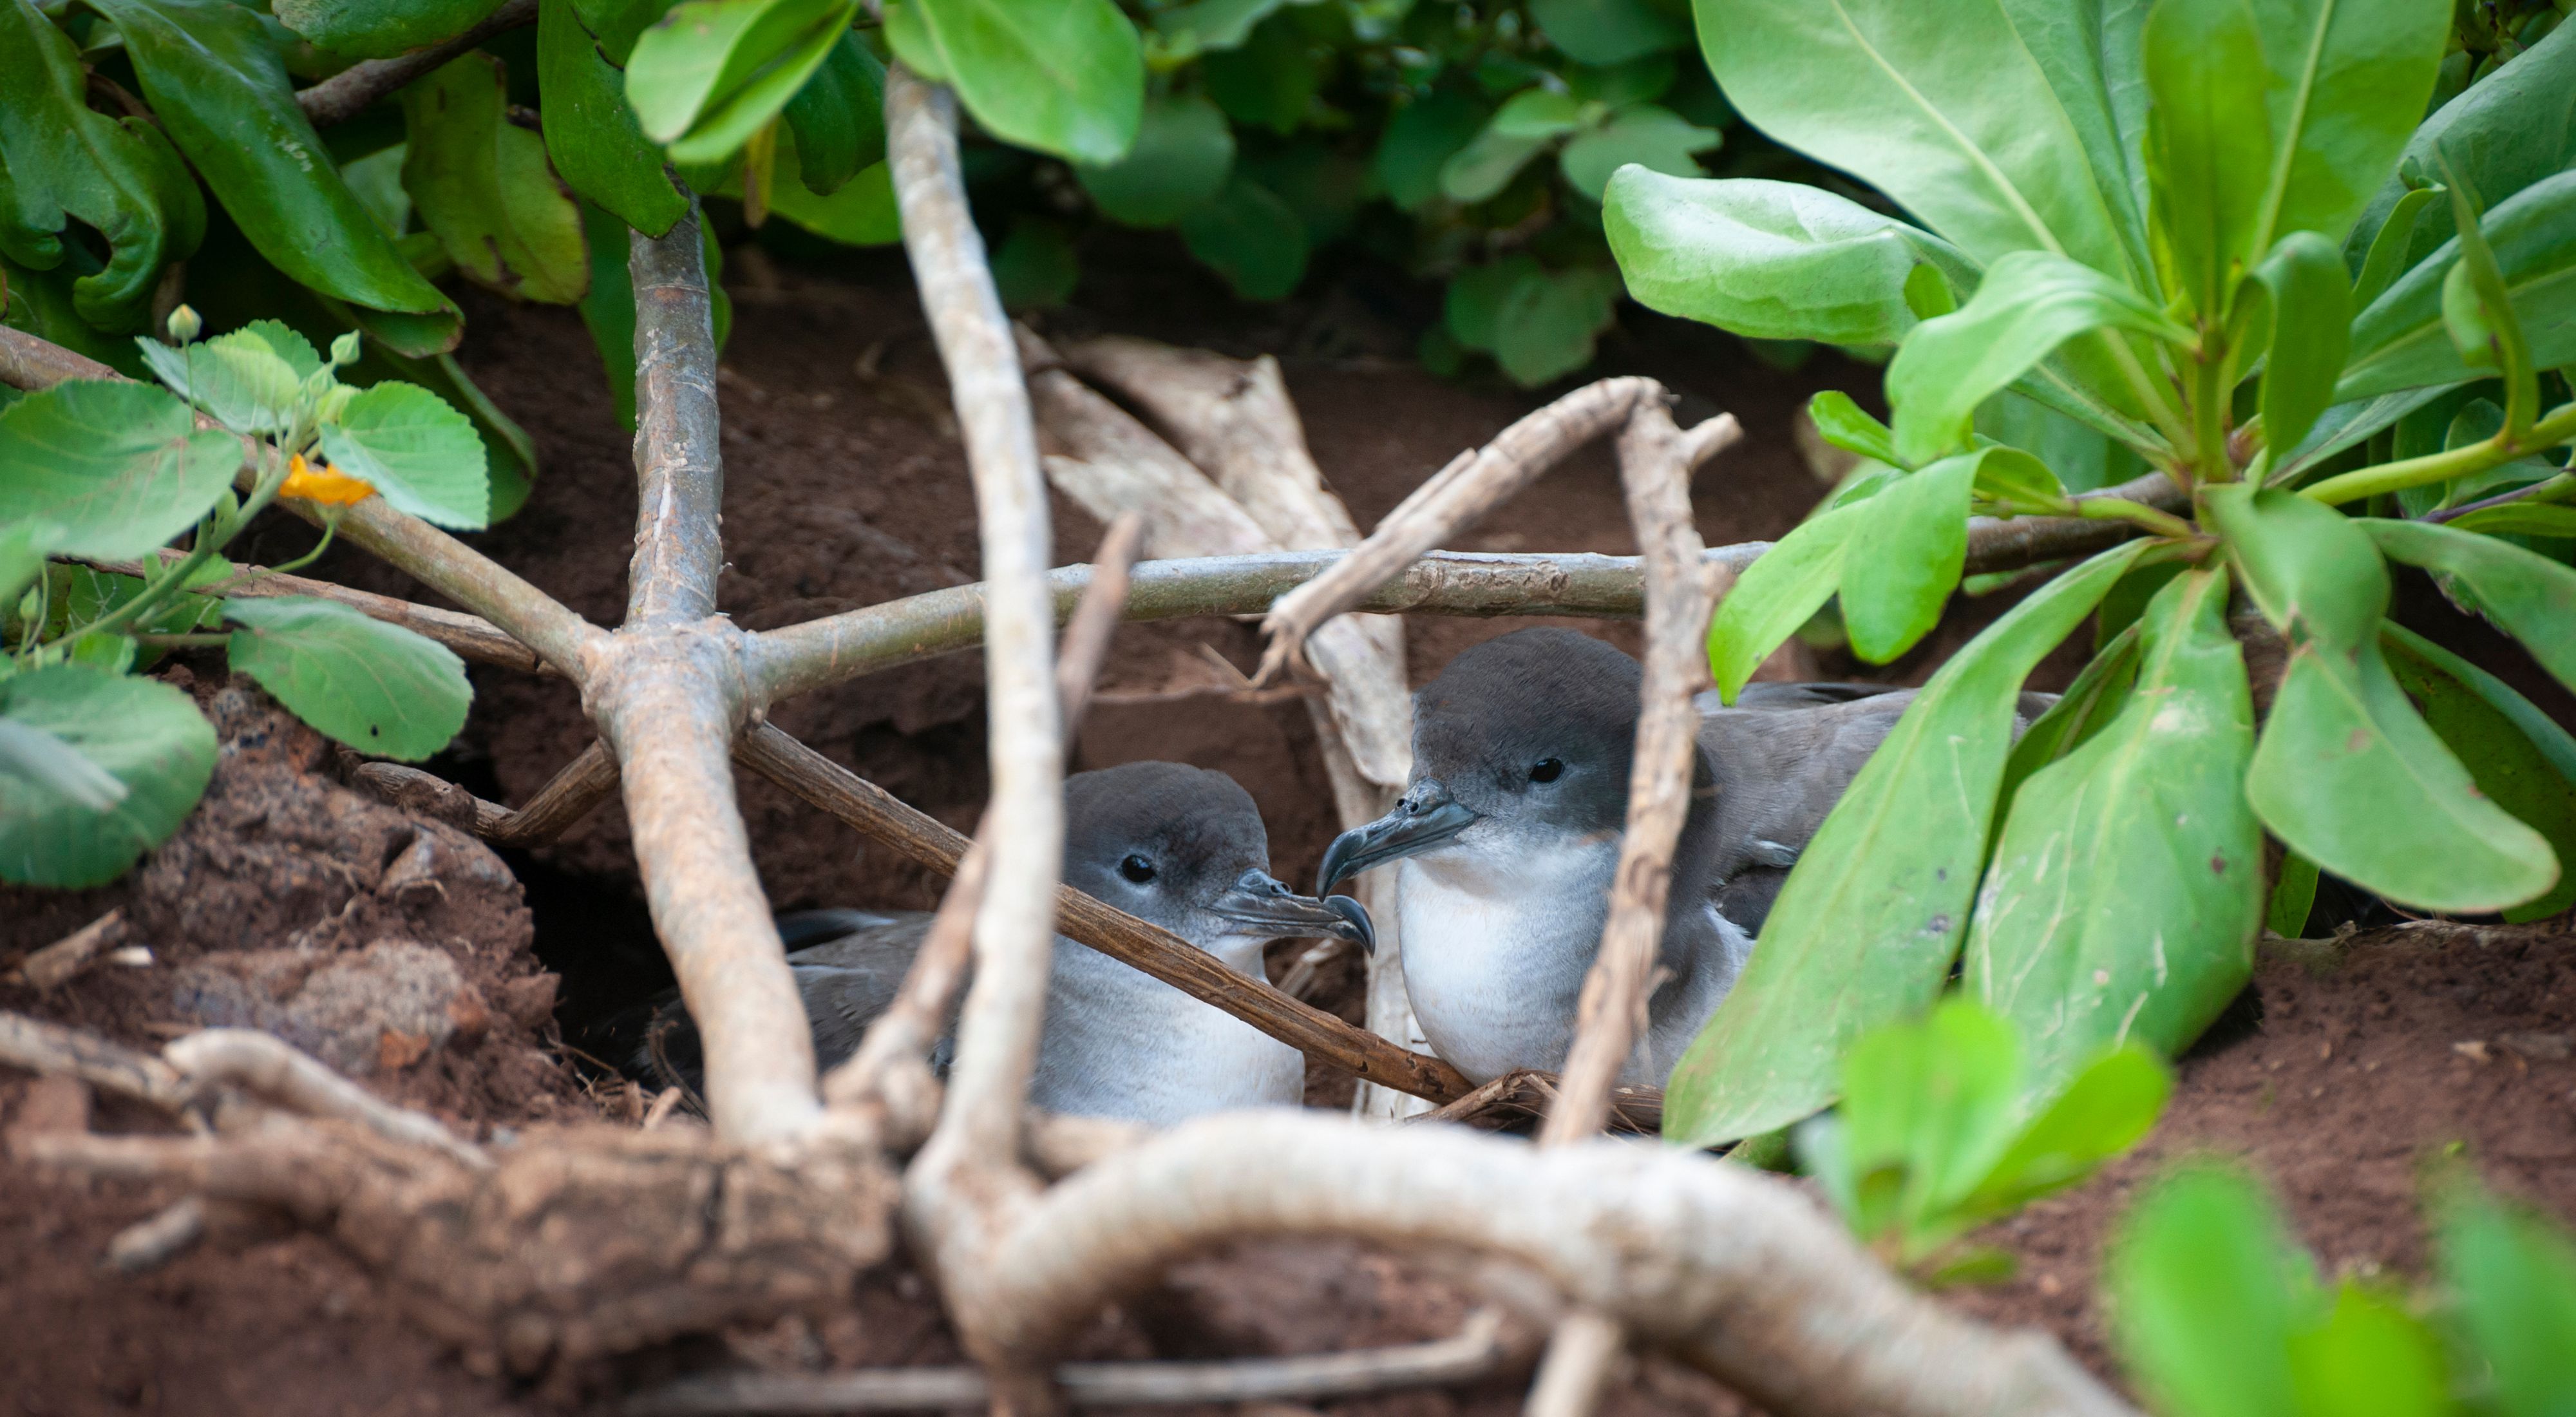 Two grey birds sit in their nest amongst dirt and green plants.